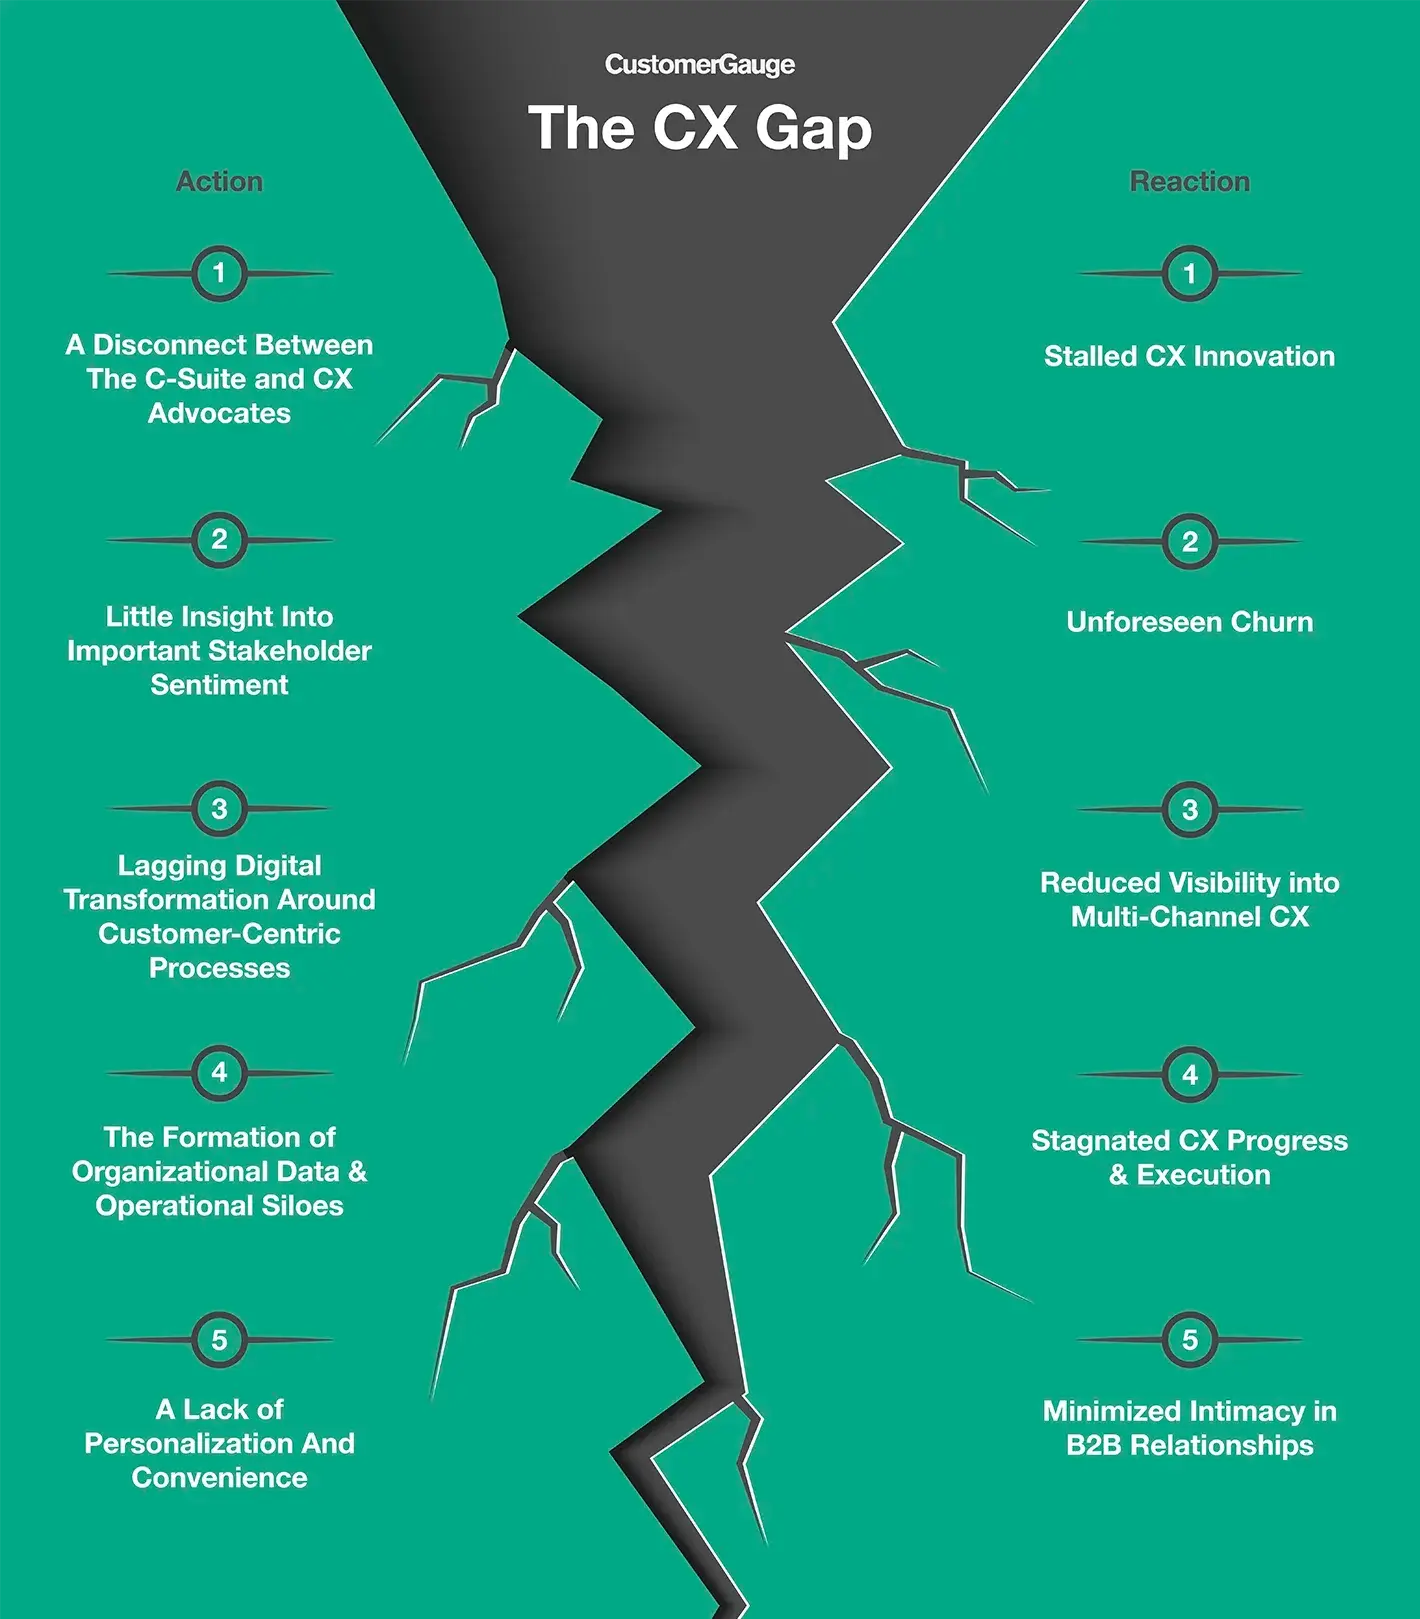 The CX Gap by CustomerGauge